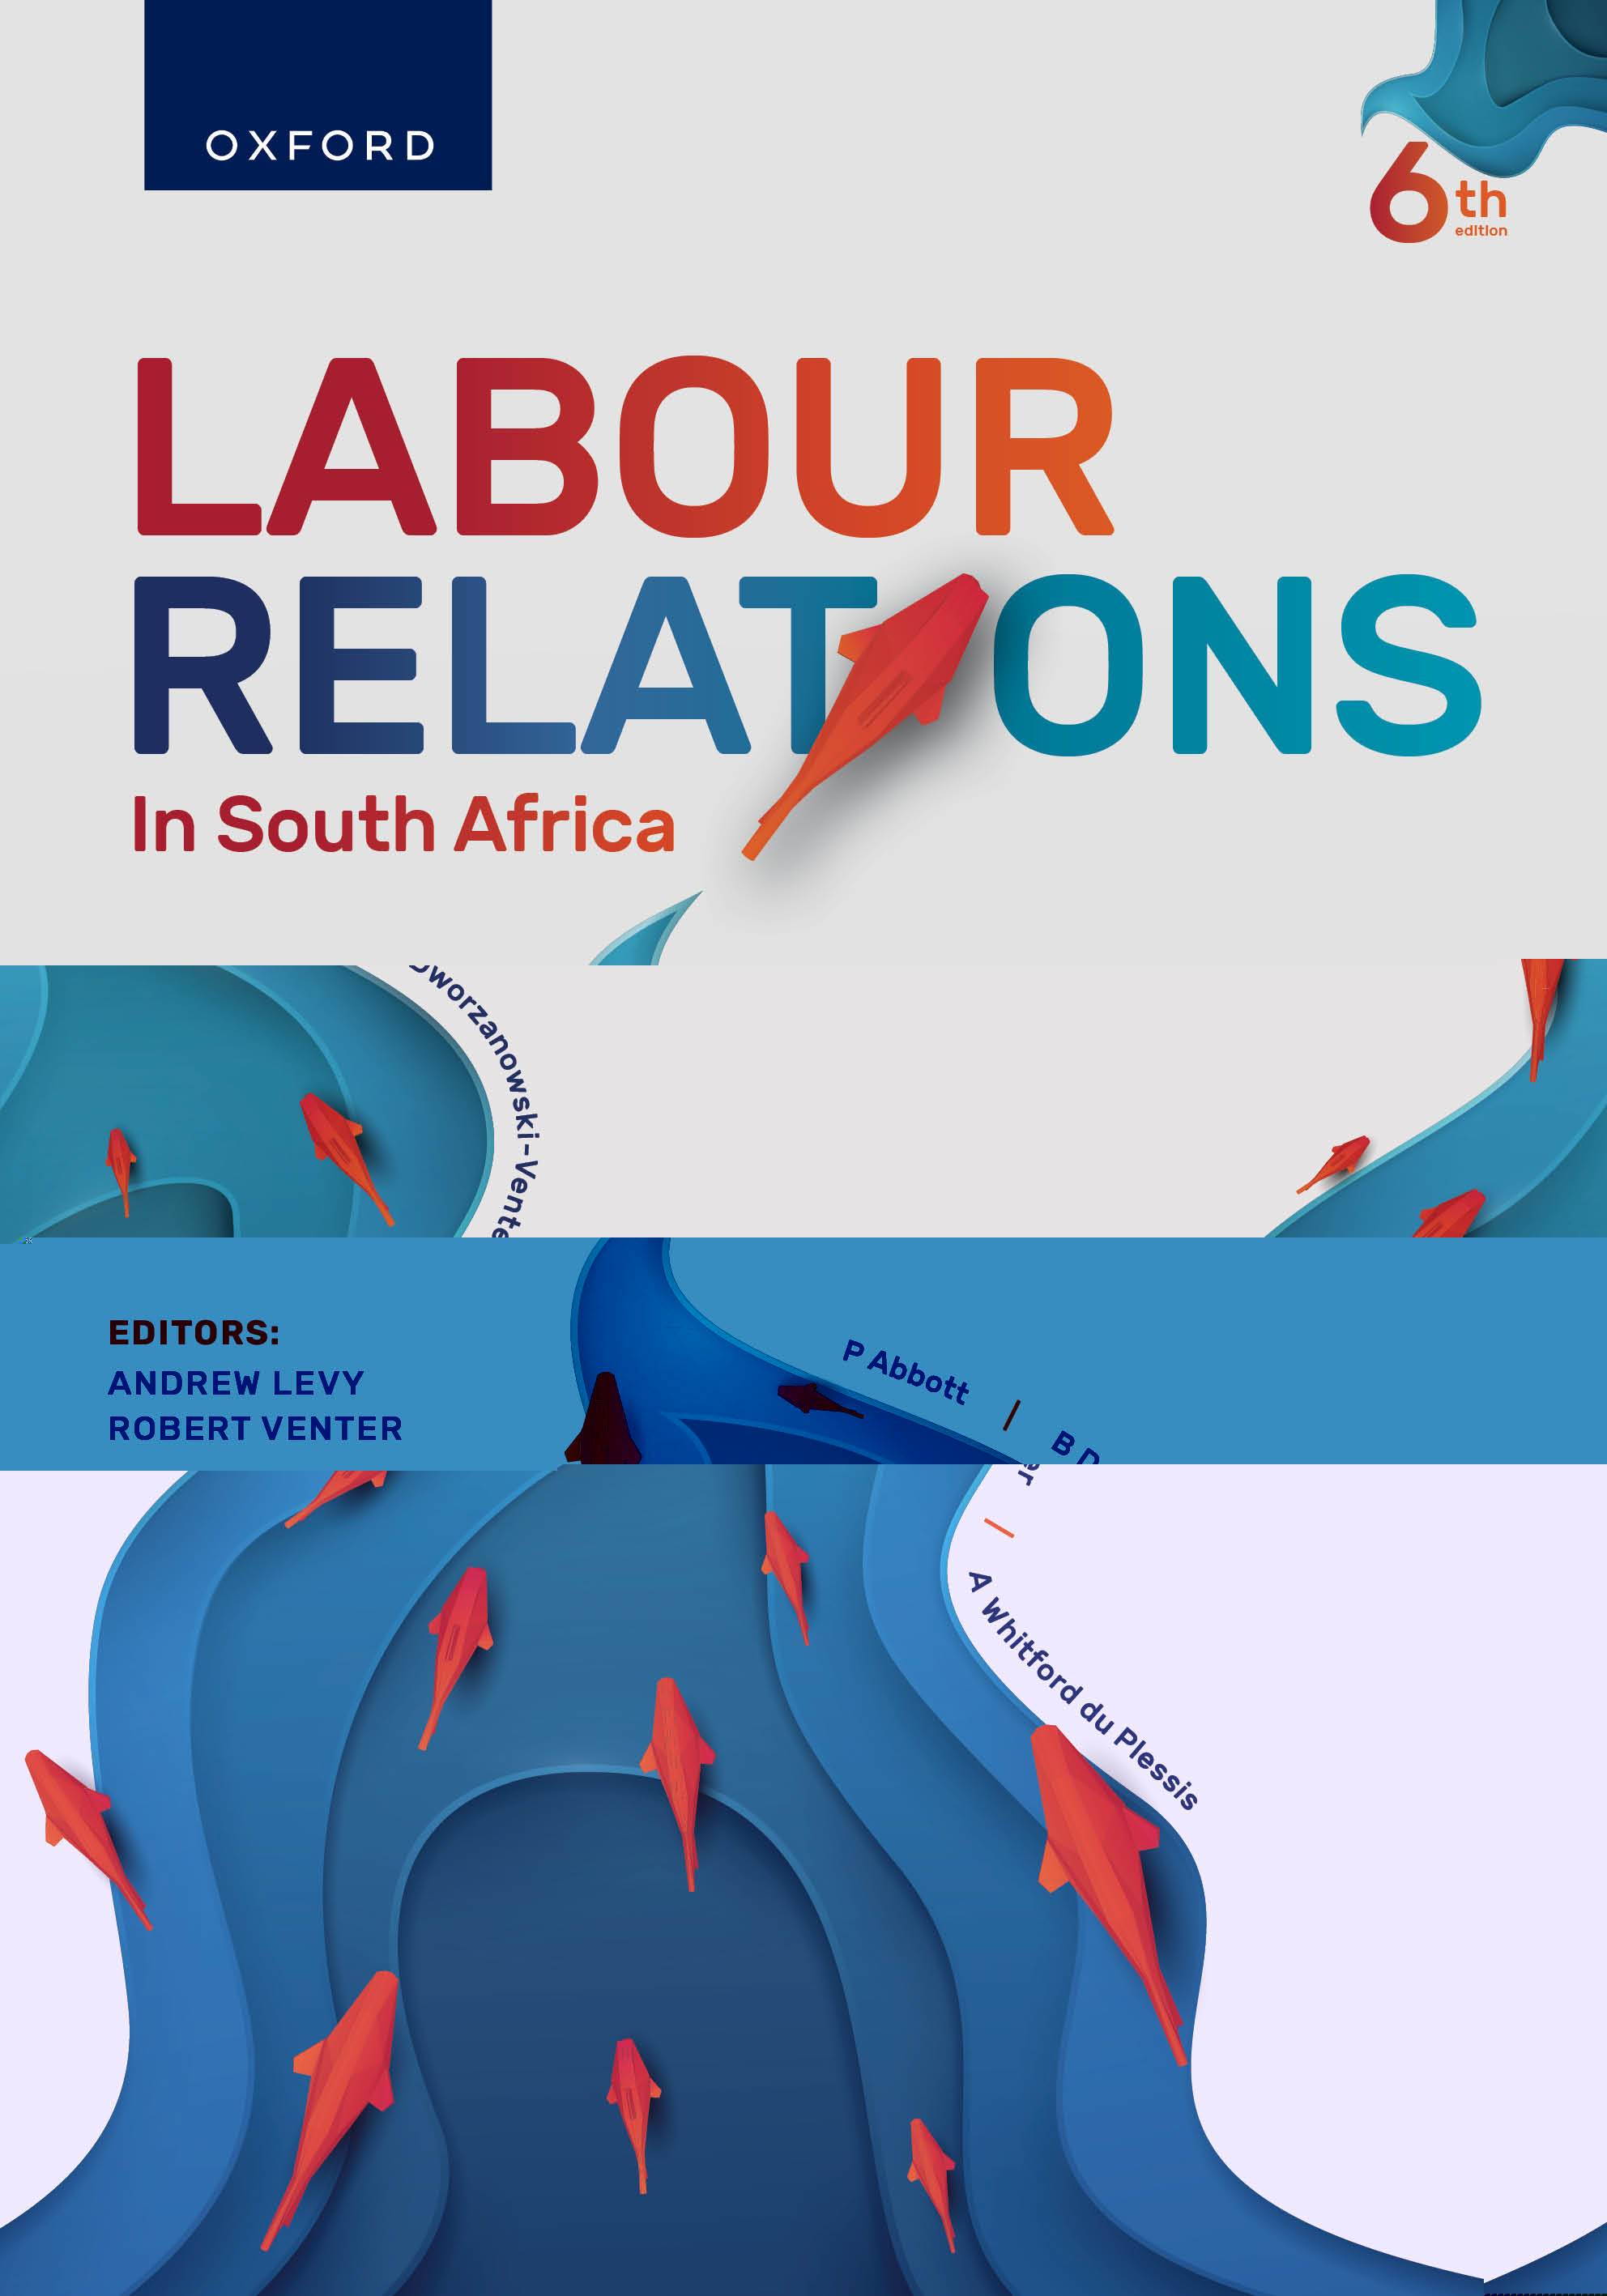 Labour Relations in South Africa (E-Book)